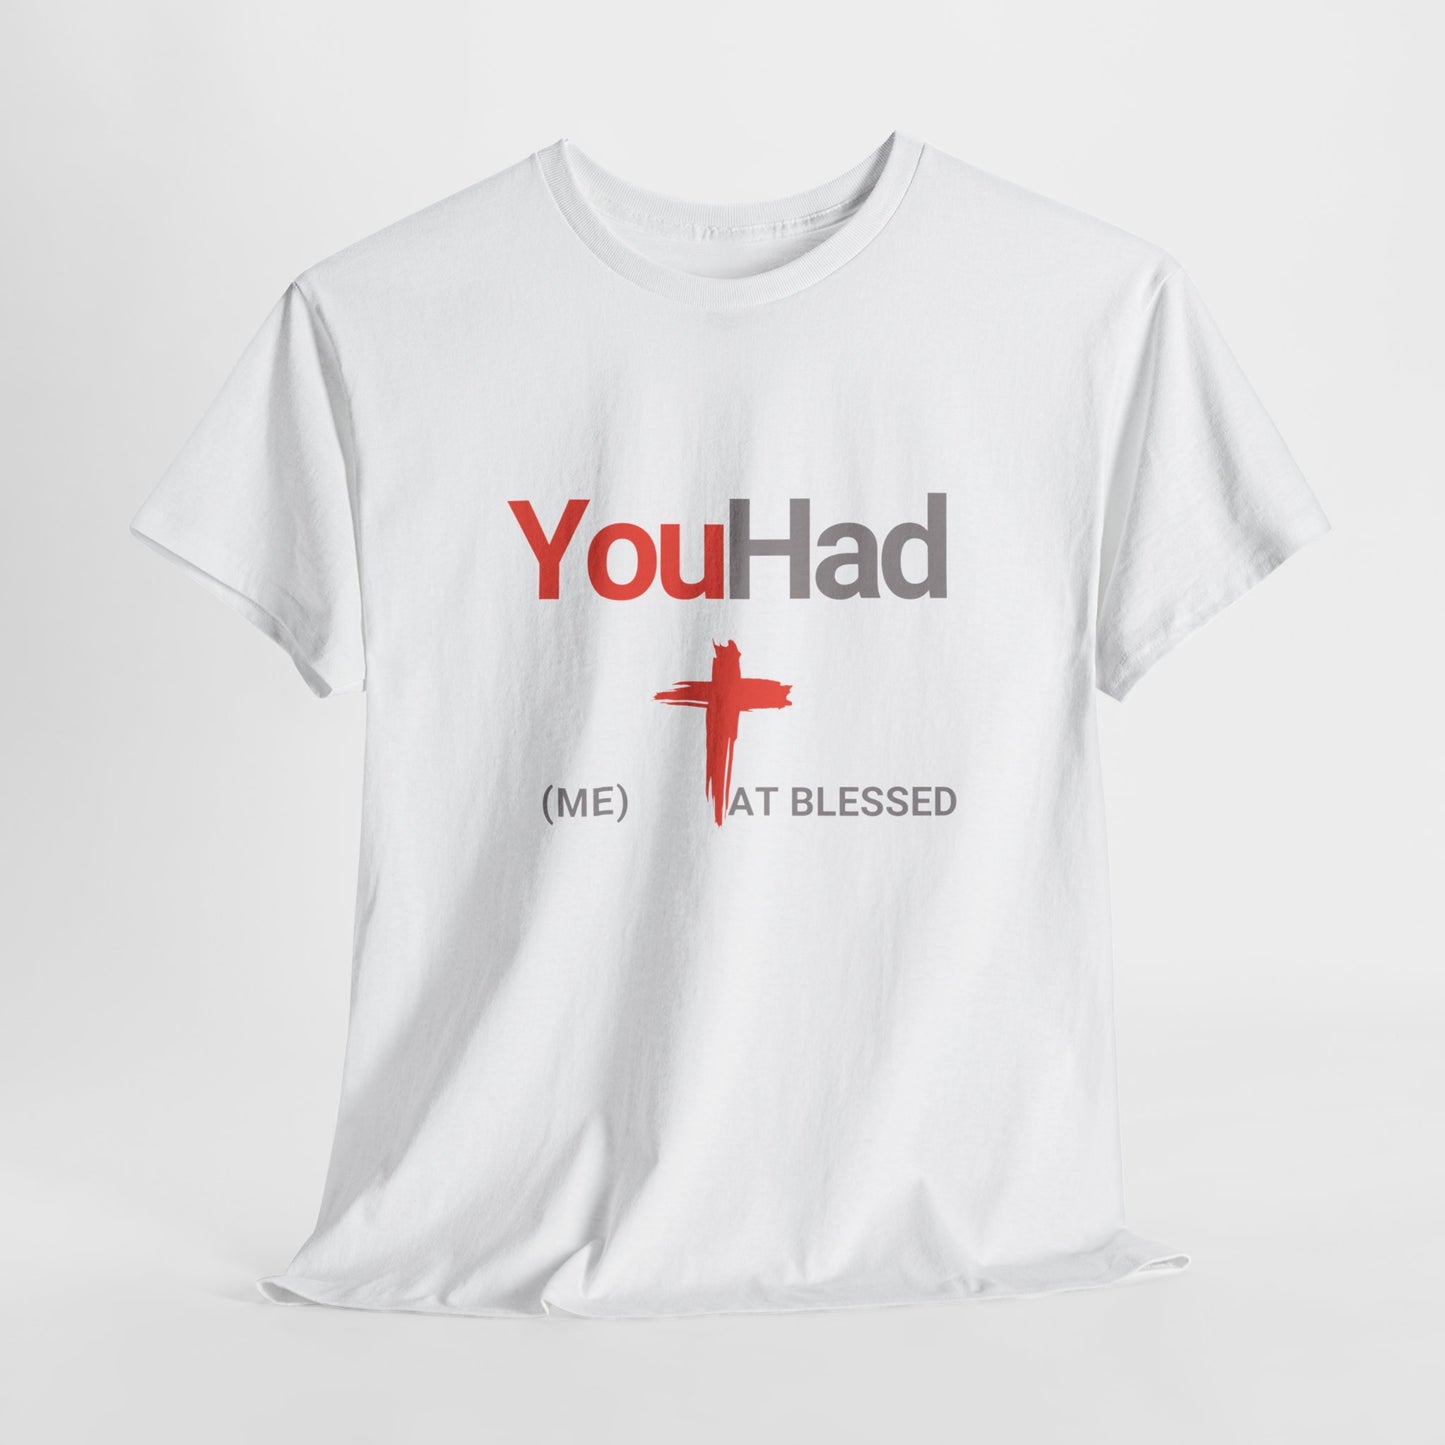 "You Had Me at Blessed" Unisex Tee